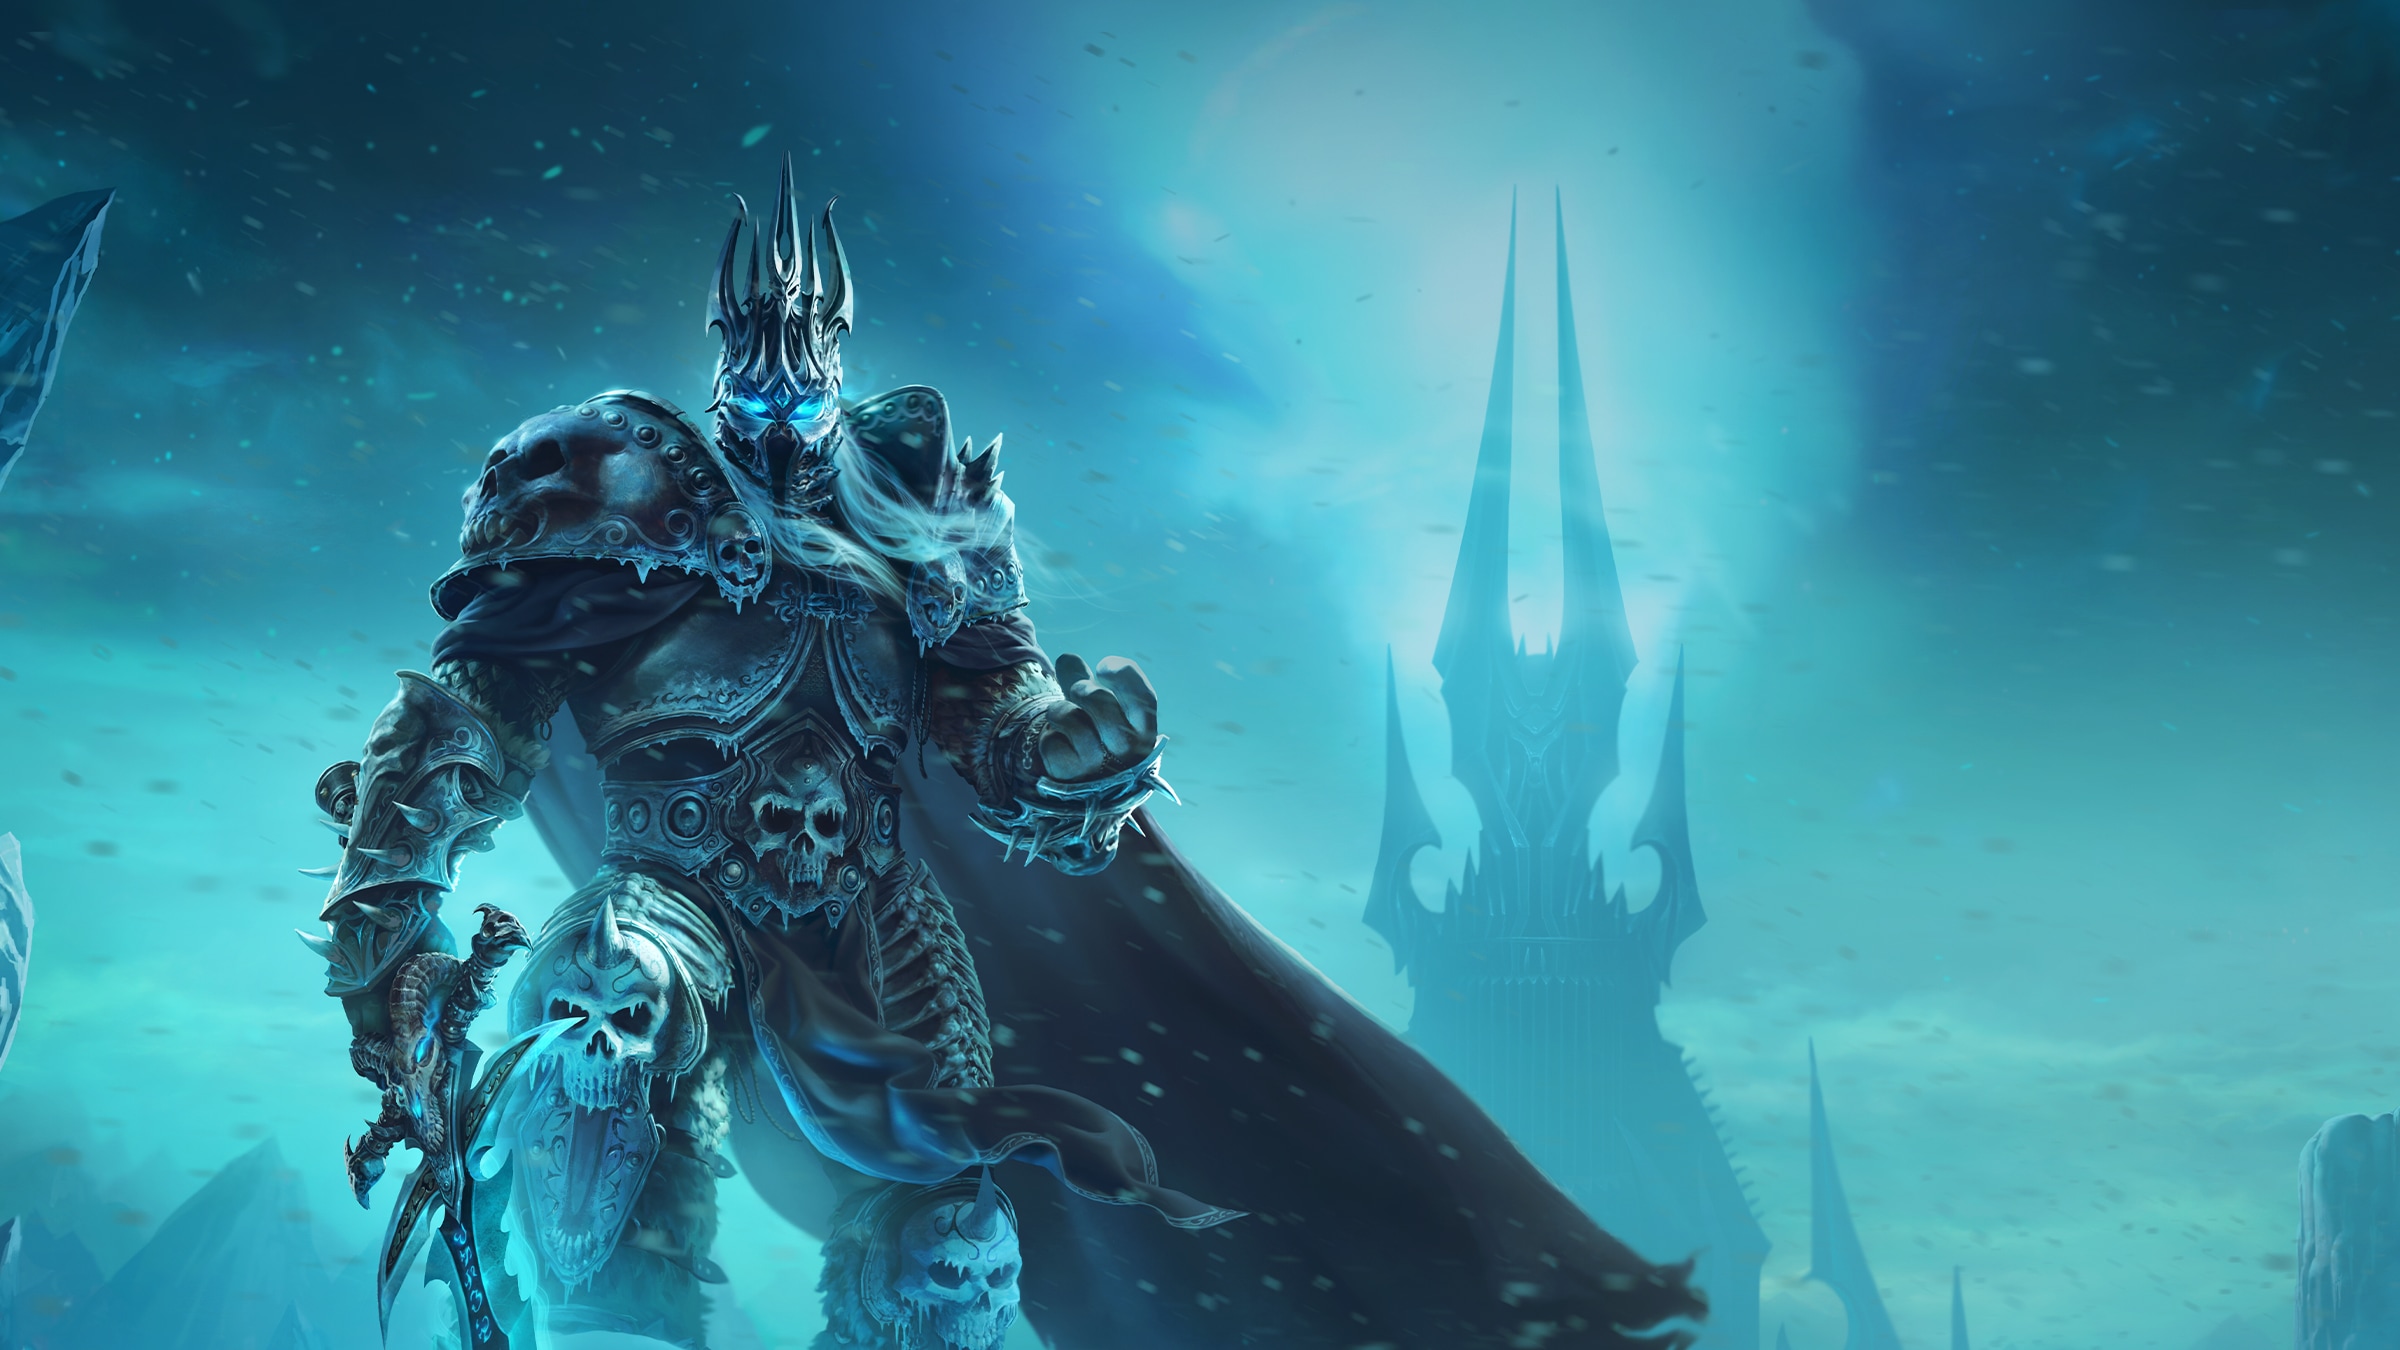 The Wrath of the Lich King Classic™ Pre-Patch Goes Now Live!